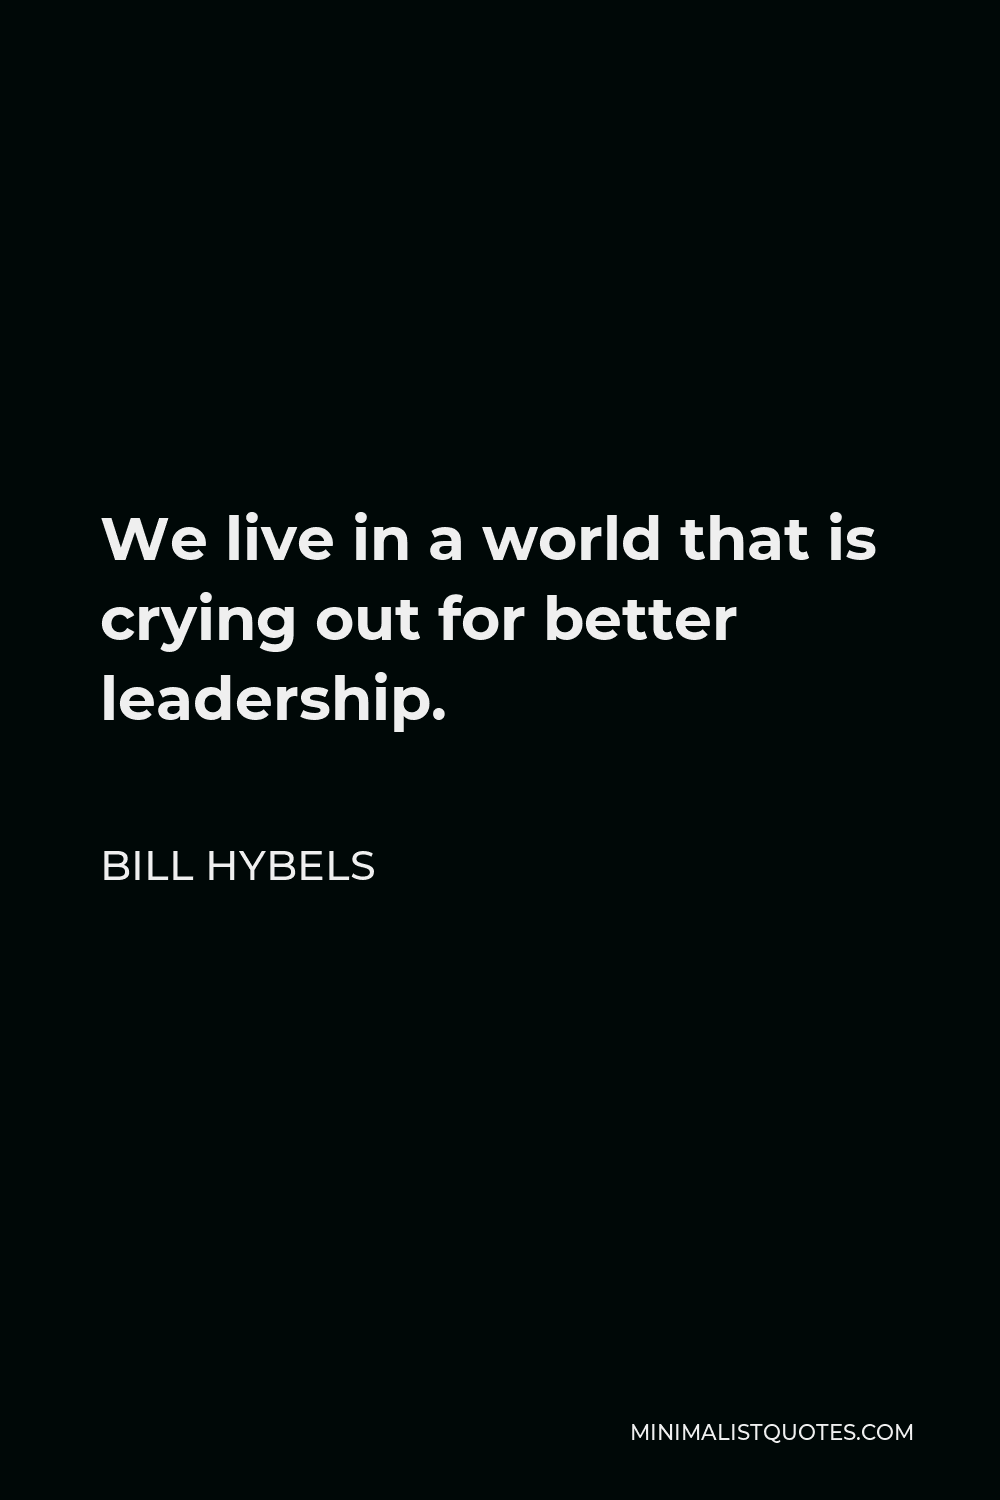 Bill Hybels Quote - We live in a world that is crying out for better leadership.